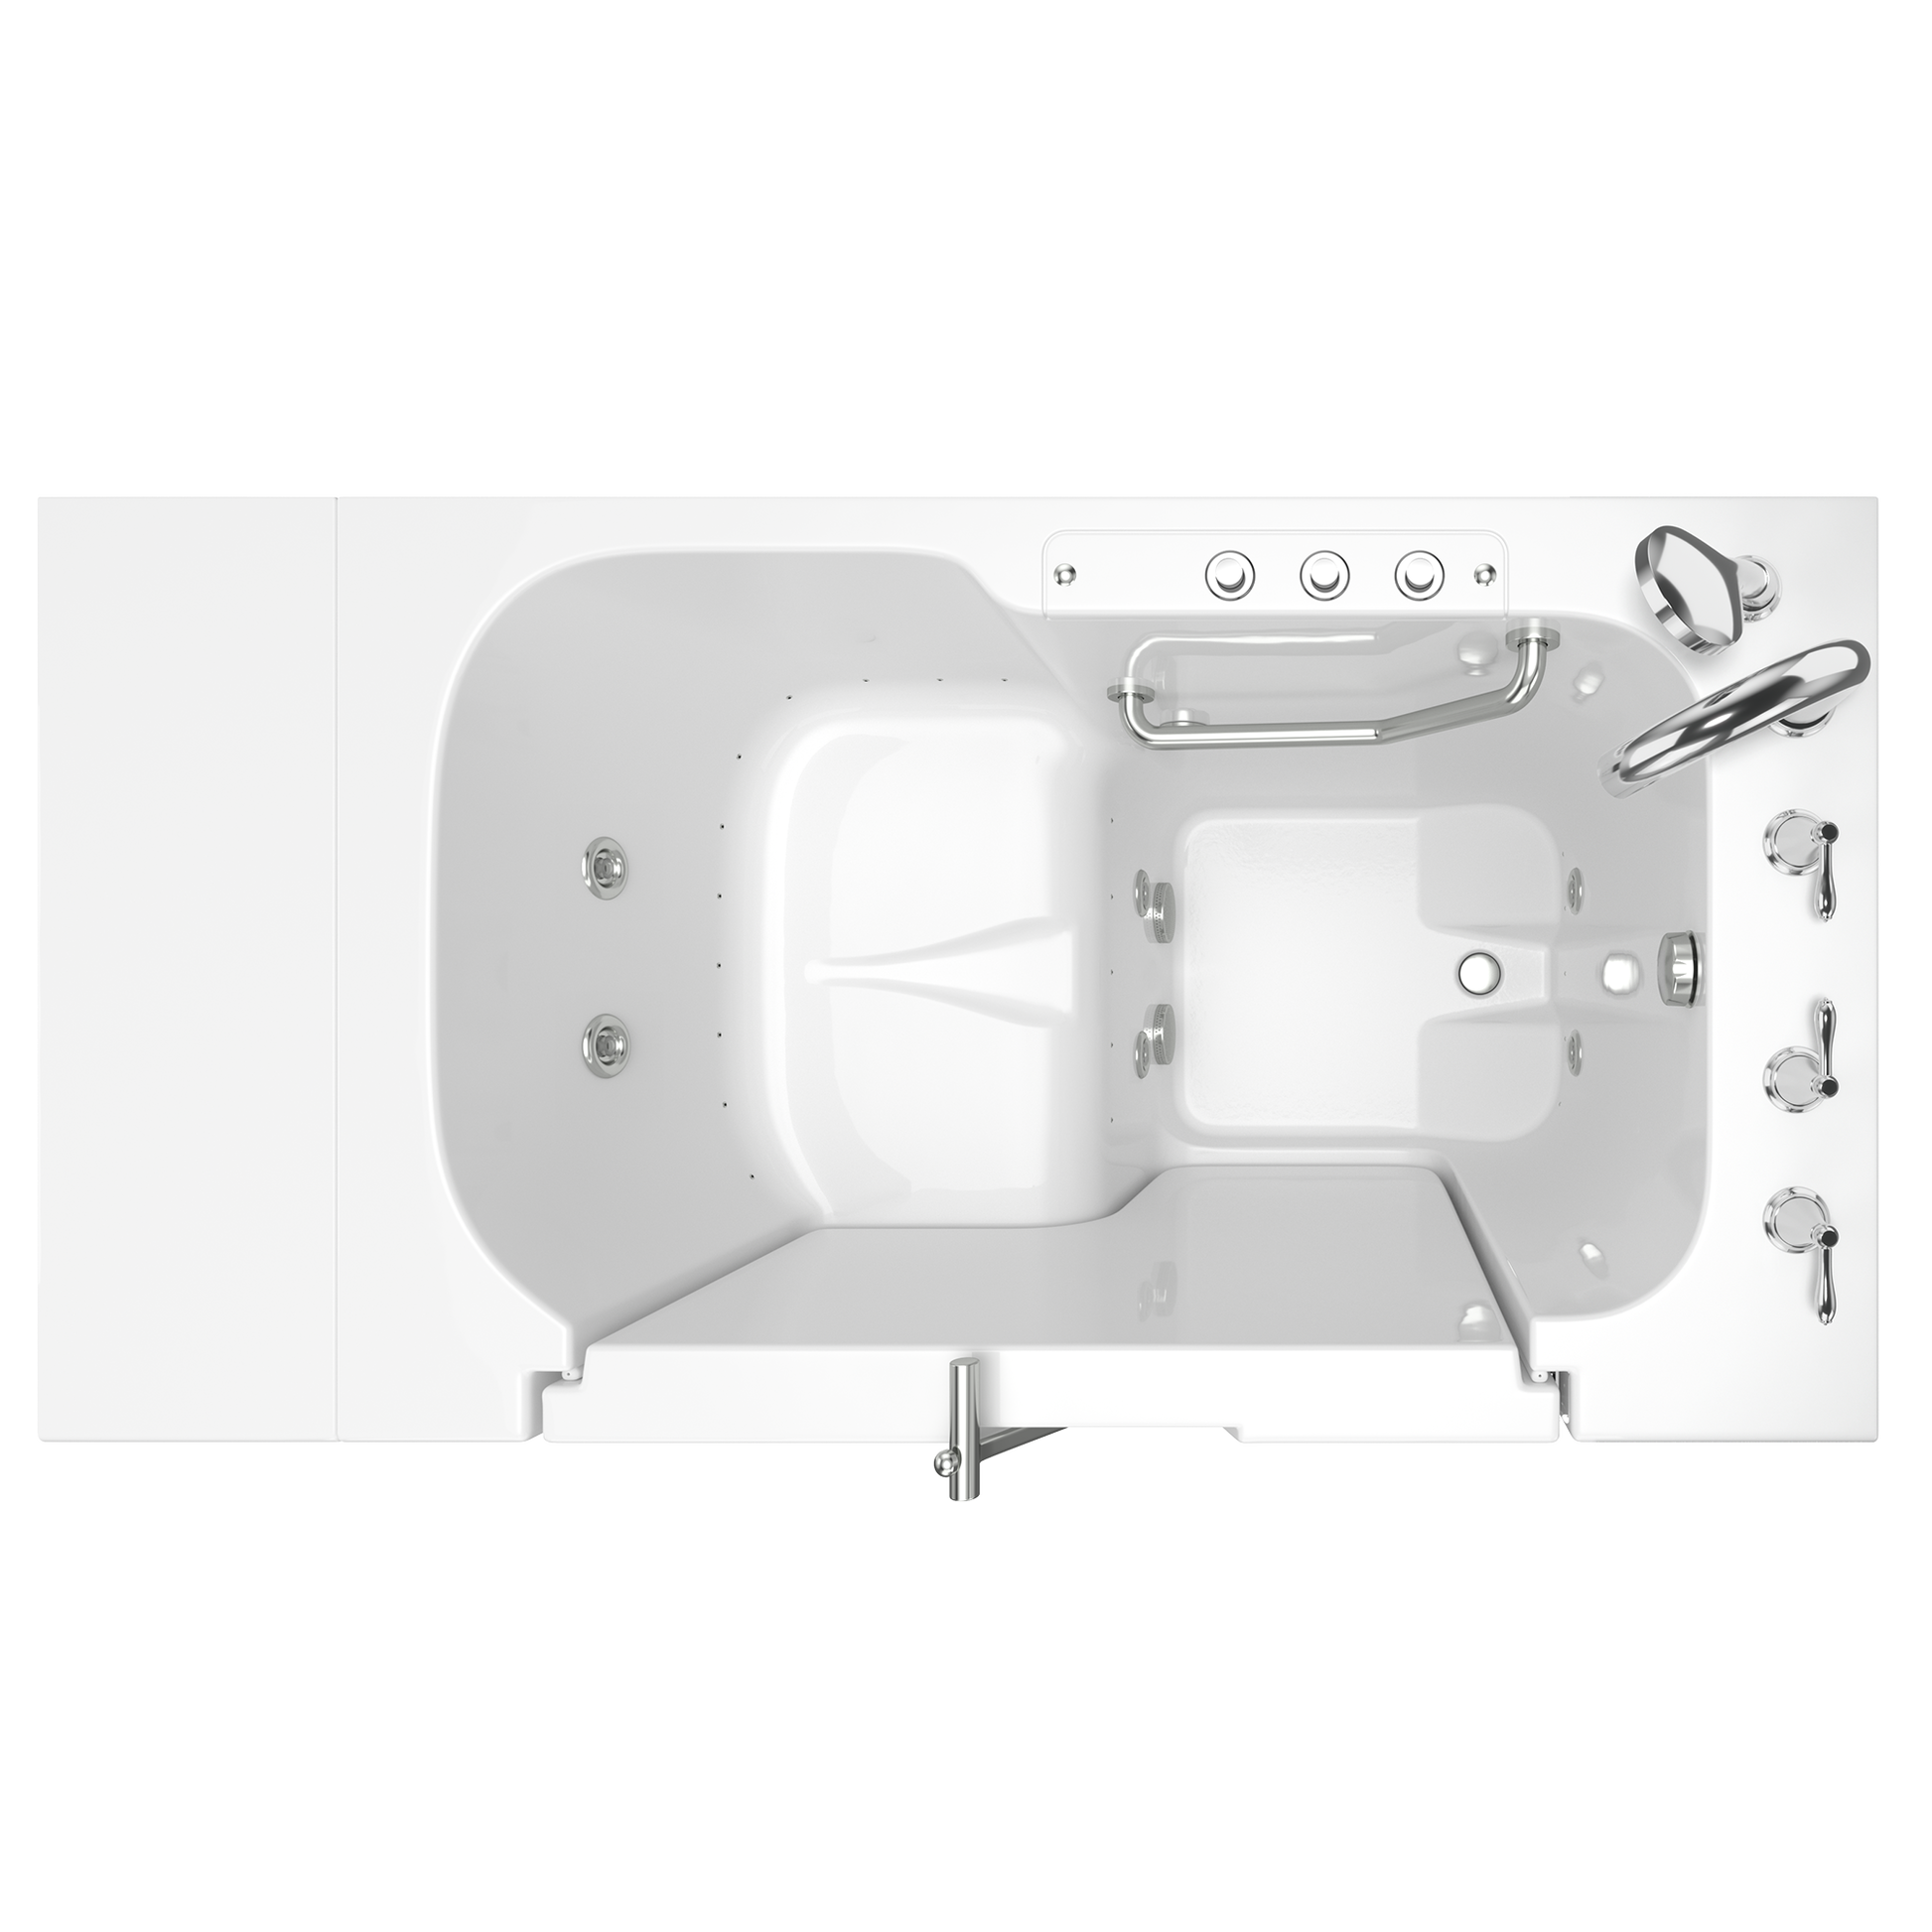 AMERICAN-STANDARD SS9OD5232RD-WH-PC, Gelcoat Premium Series 32 in. x 52 in. Outward Opening Door Walk-In Bathtub with Air Spa and Whirlpool system in Wib White